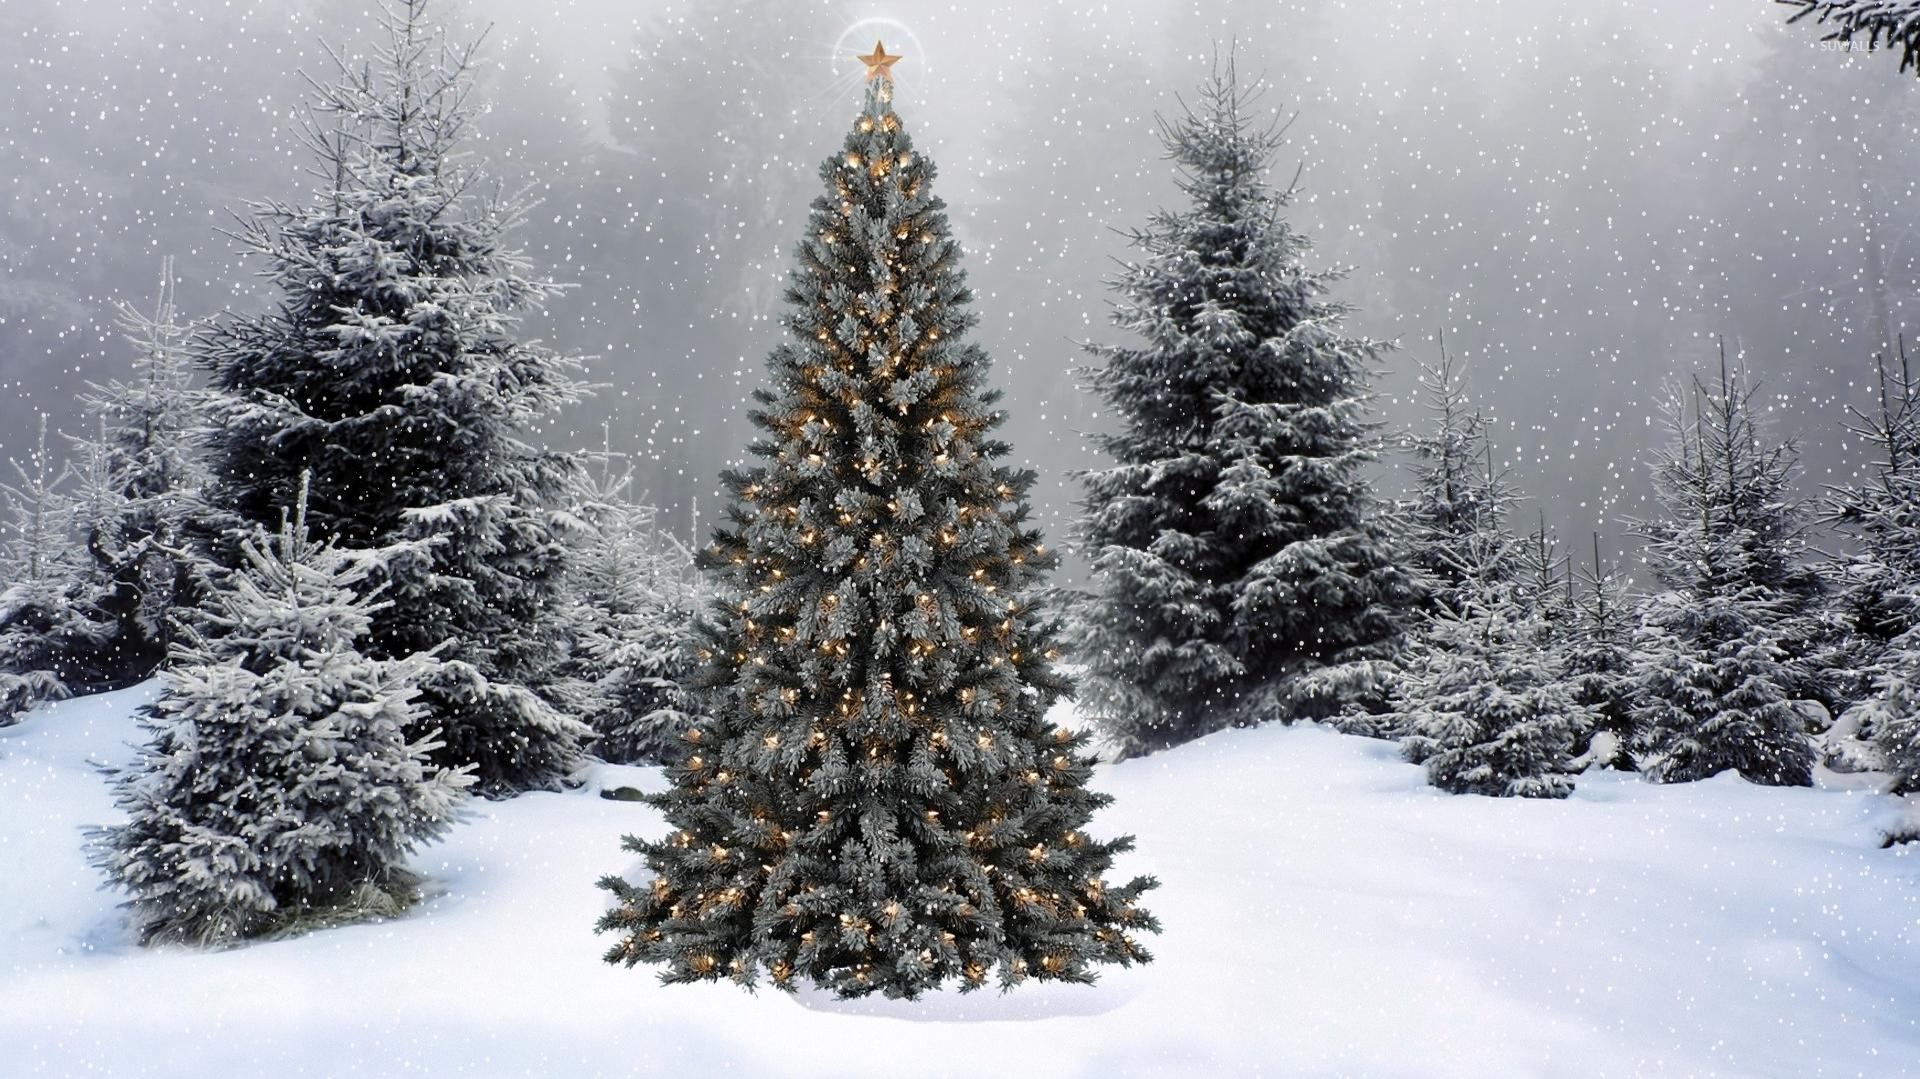 Snow Falling On The Christmas Tree Wallpaper Holiday